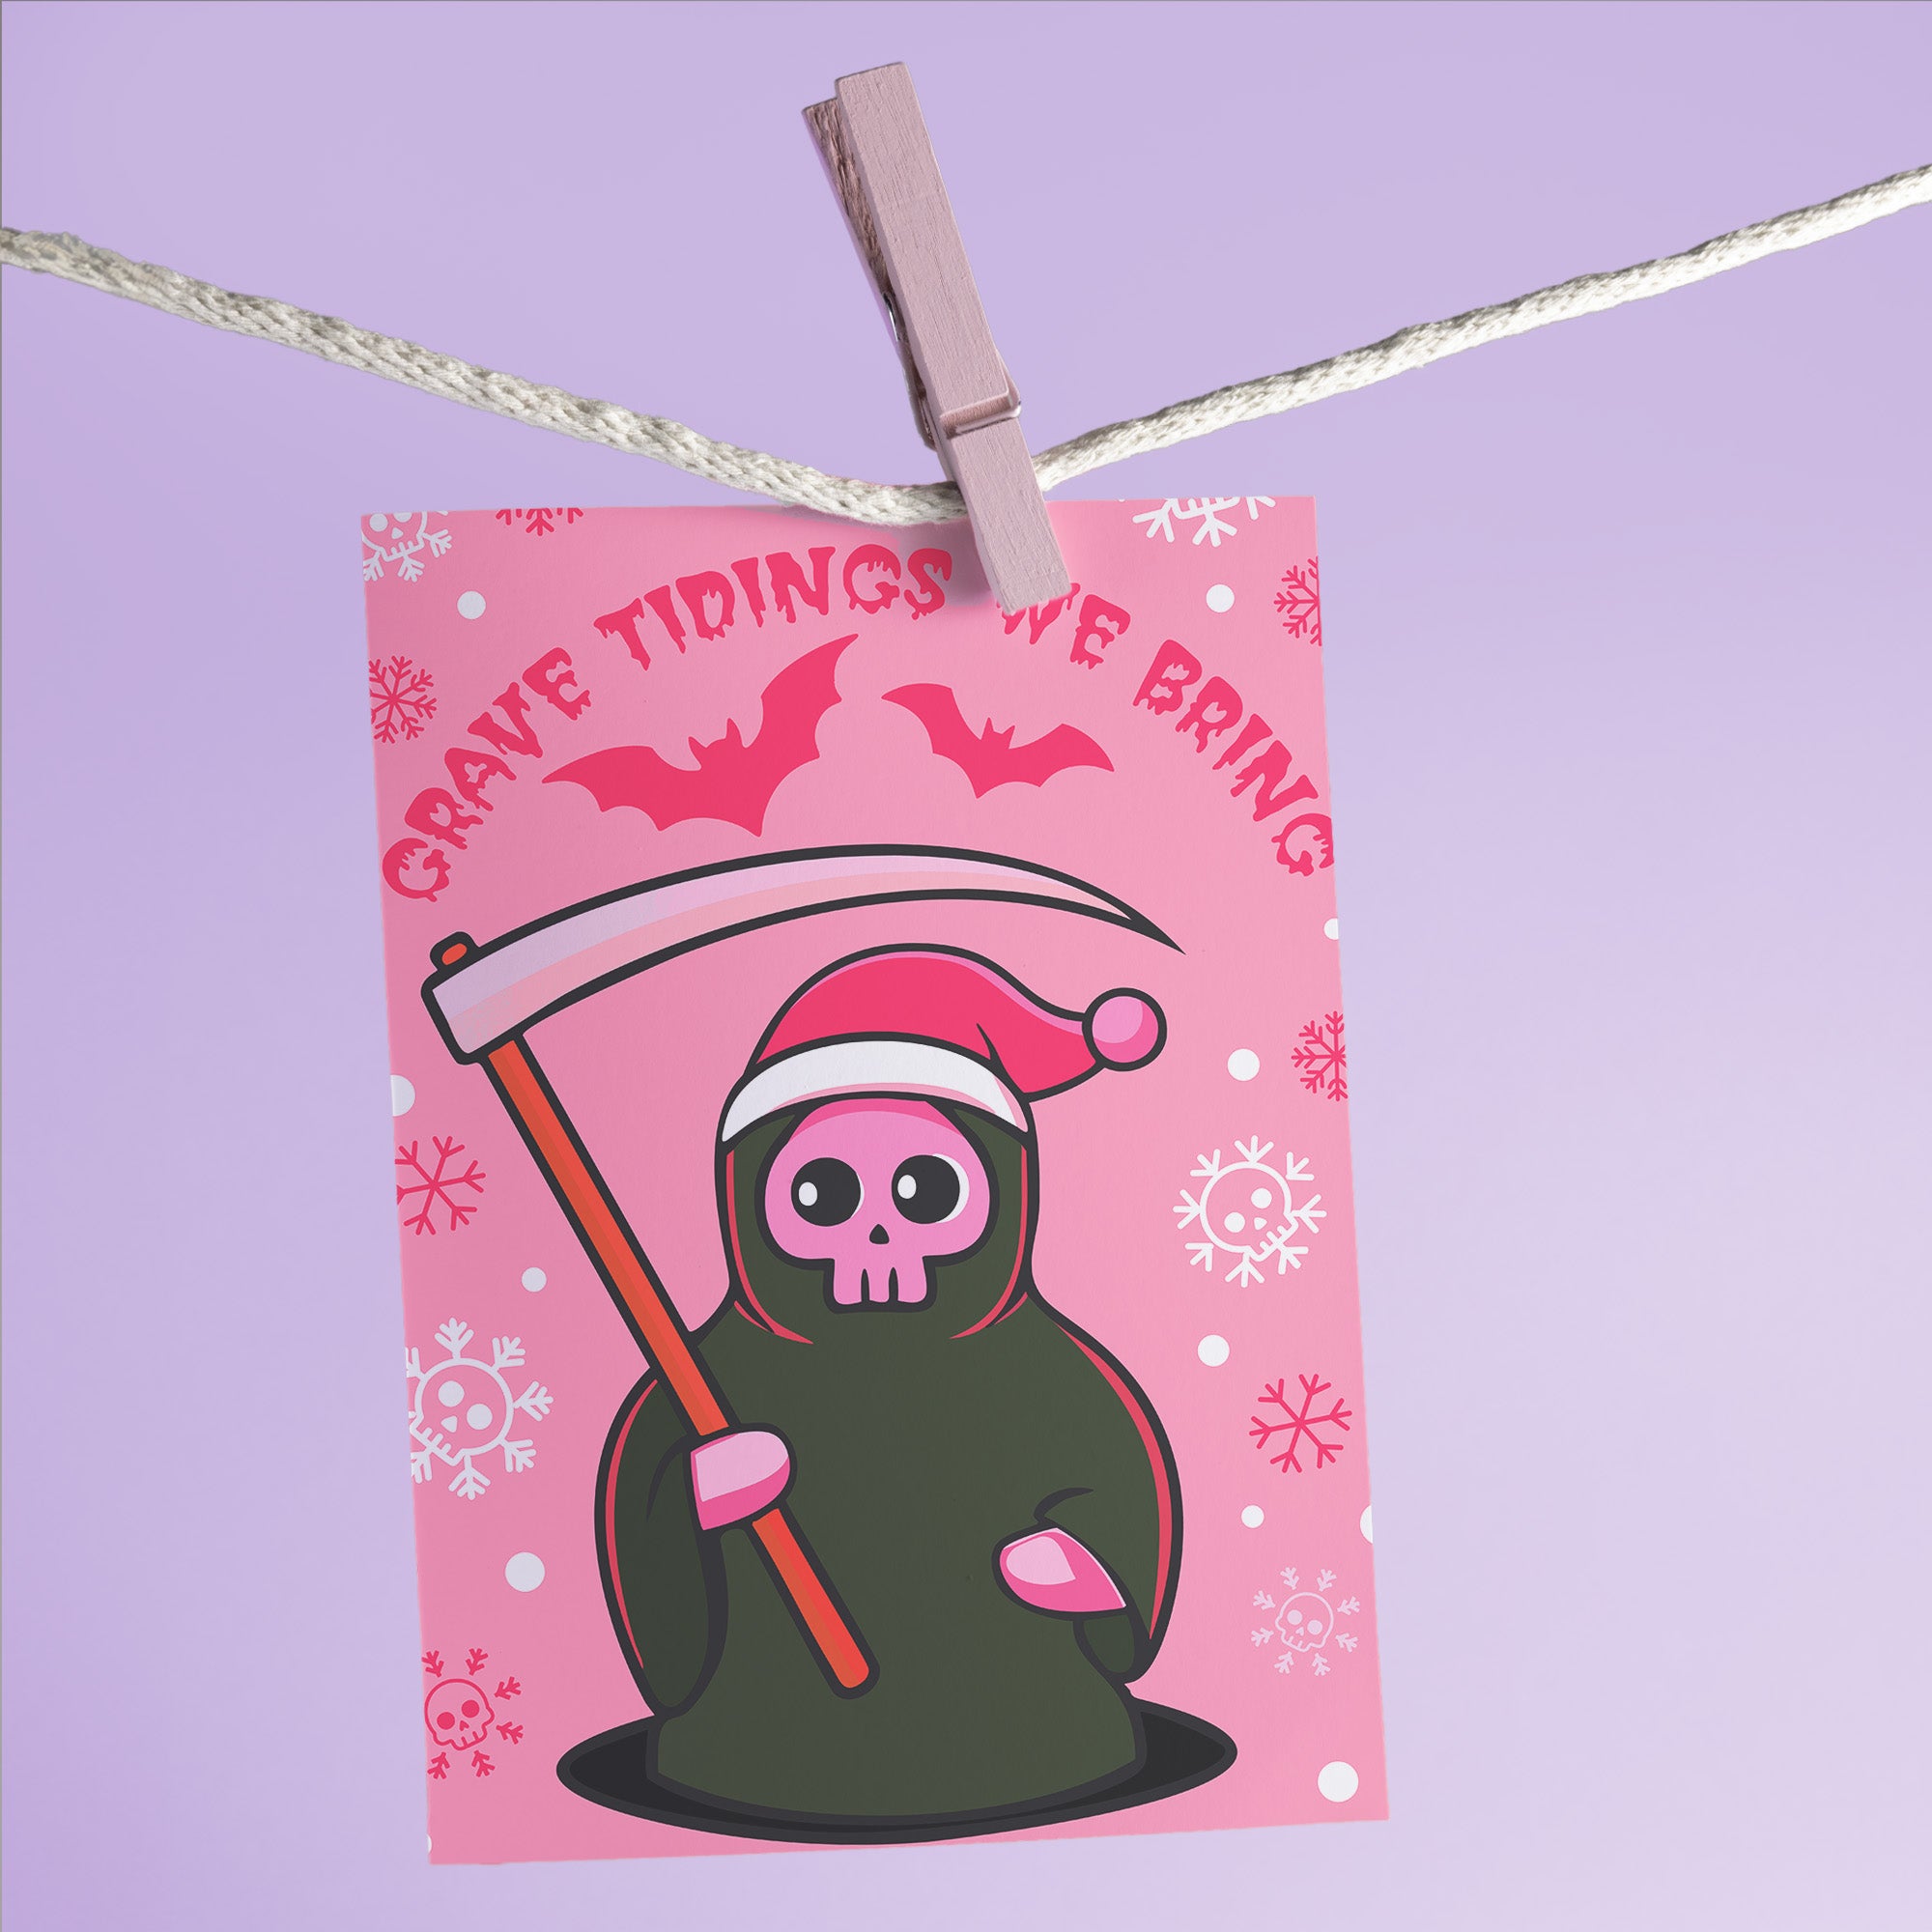 Quirky Christmas card featuring grim reaper in Santa hat. Pink background with bats, snowflakes, skull motifs. Text reads 'Grave Tidings We Bring'. Humorous blend of holiday cheer and gothic aesthetic. Perfect for alternative Christmas greetings.